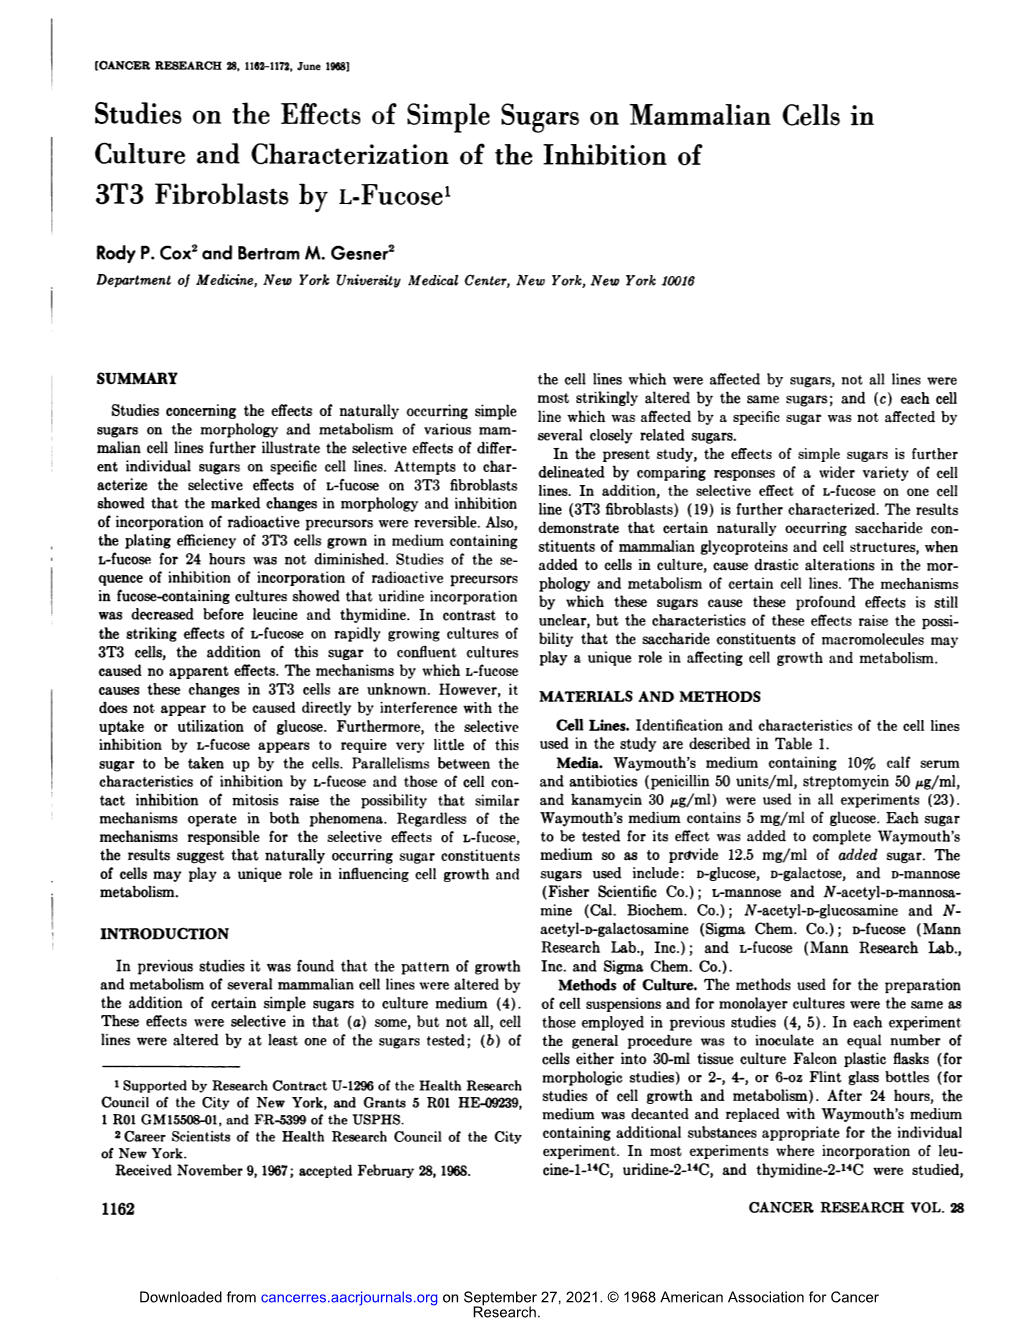 Studies on the Effects of Simple Sugars on Mammalian Cells in Culture and Characterization of the Inhibition of 3T3 Fibroblasts by L-Fucose1